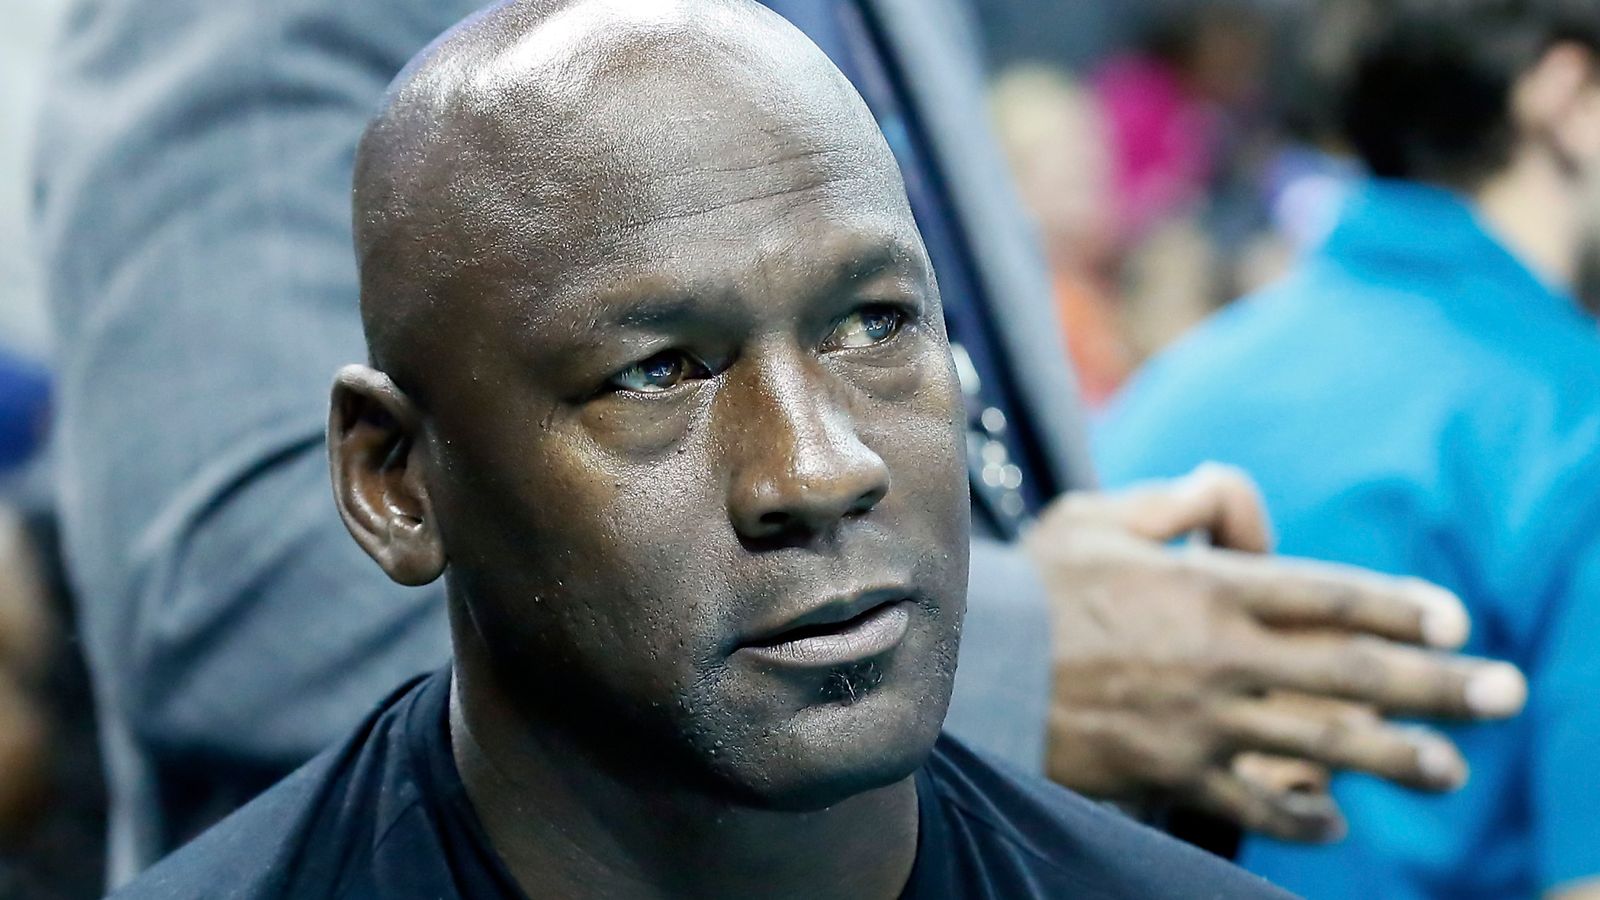 Michael Jordan to donate $100m in fight for racial equality | NBA News ...